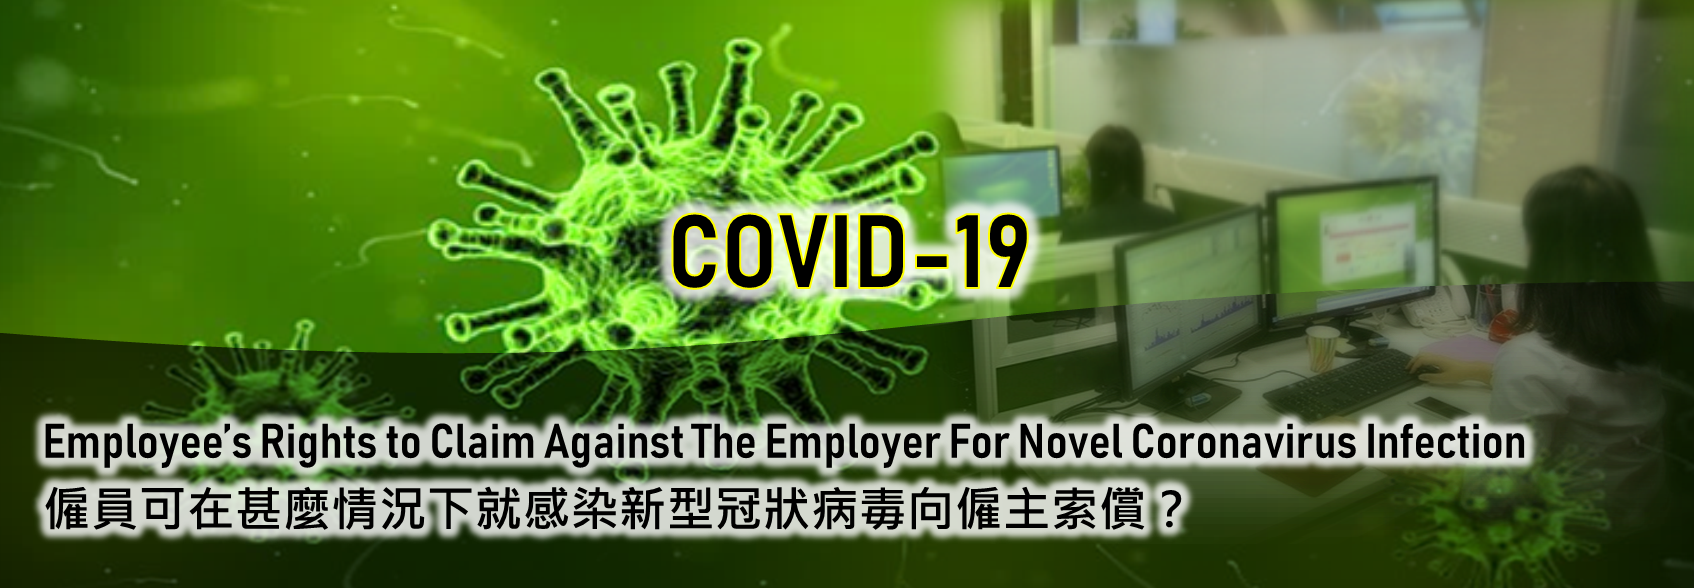 Employee’s rights to claim against the employer for Novel Coronavirus infection